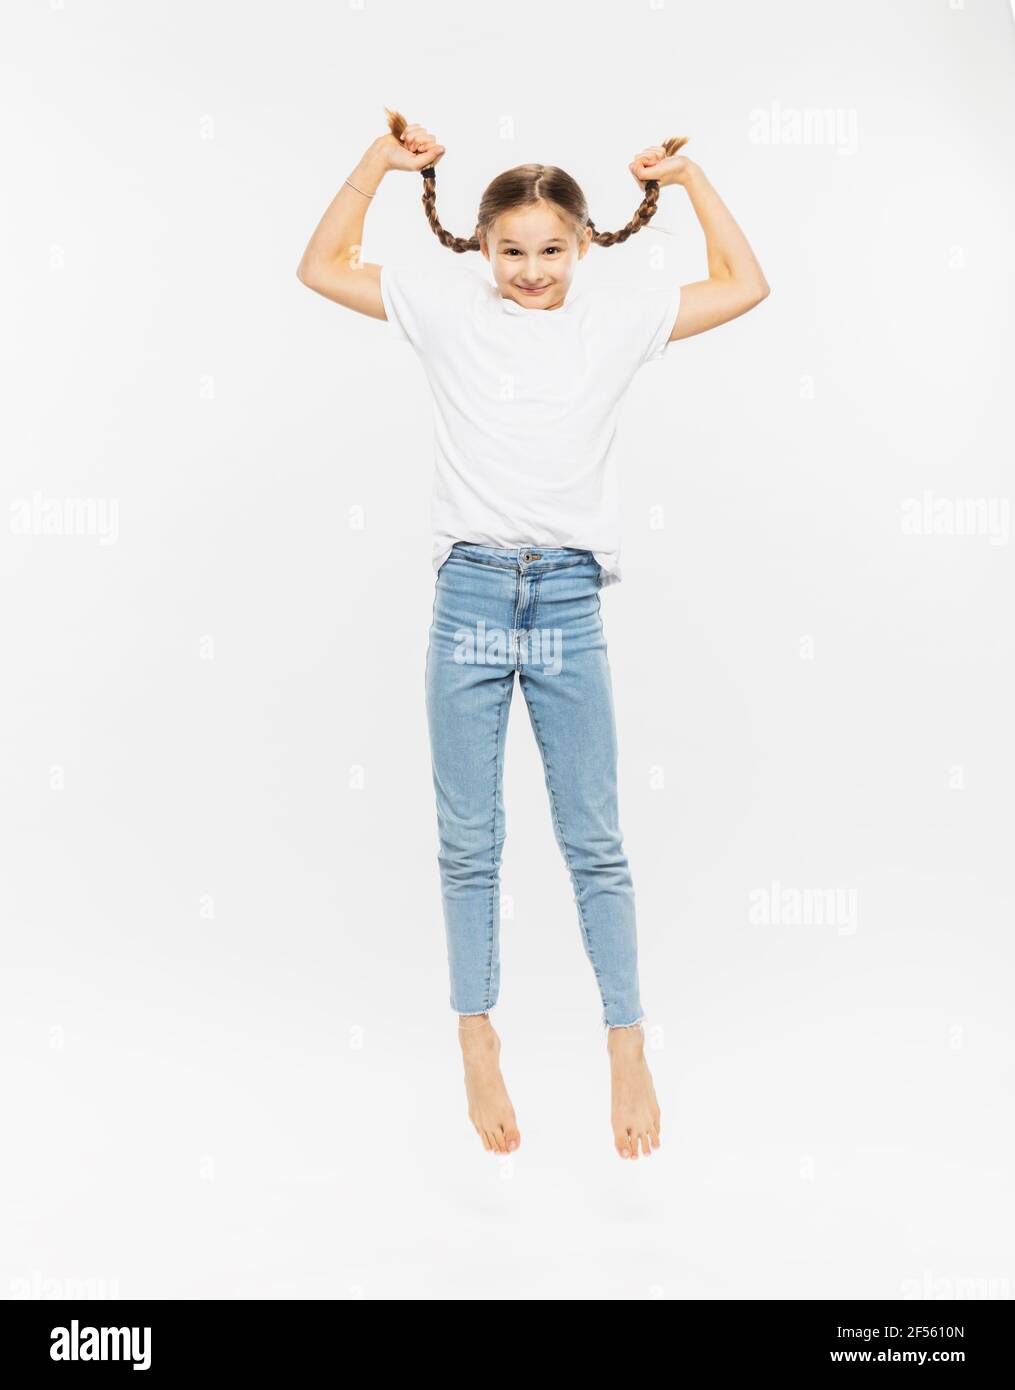 Girl holding her pigtail while jumping against white background Stock Photo